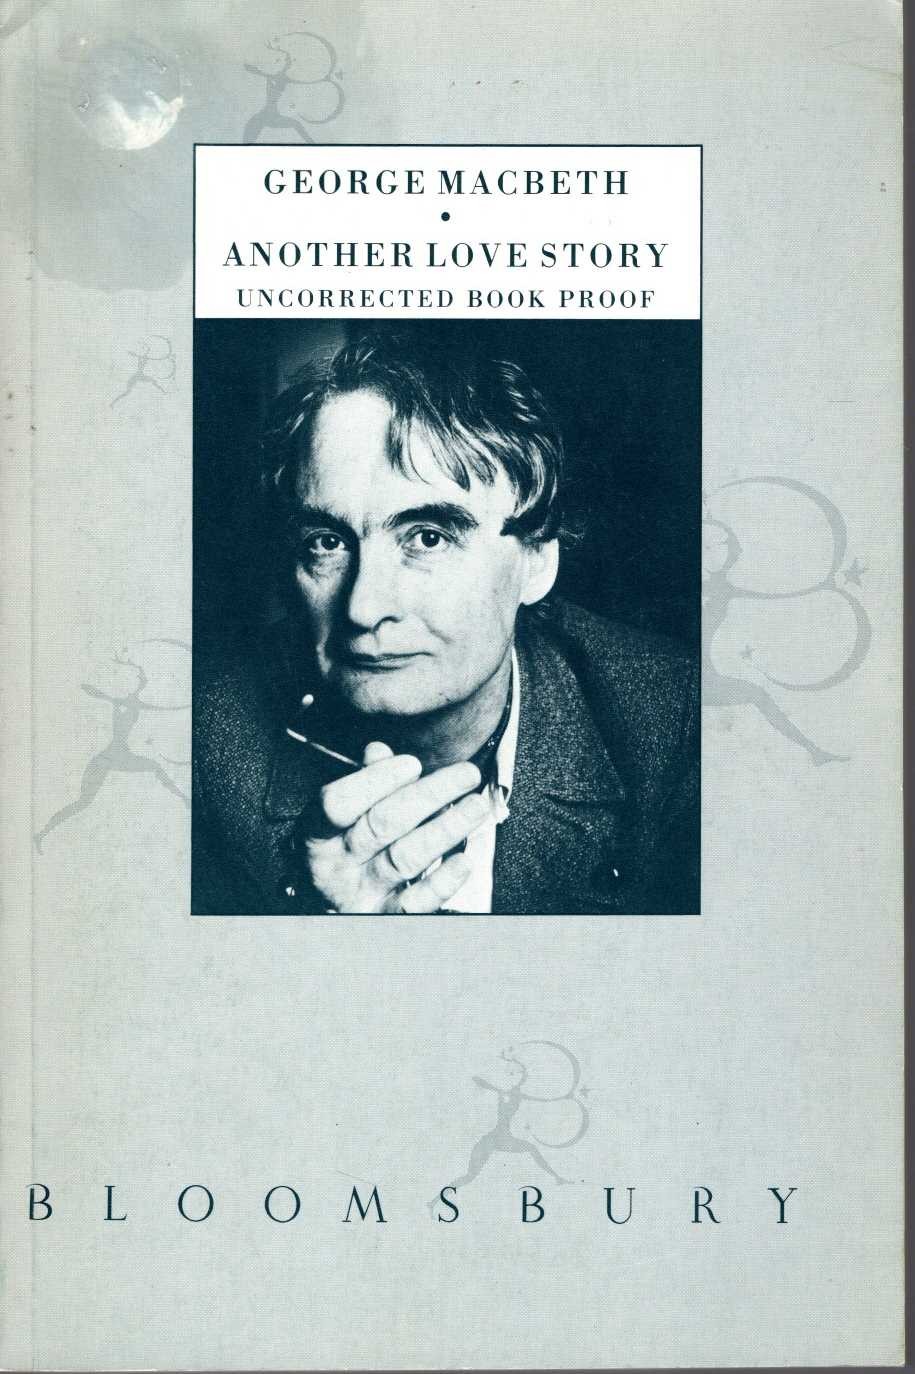 ANOTHER LOVE STORY front book cover image